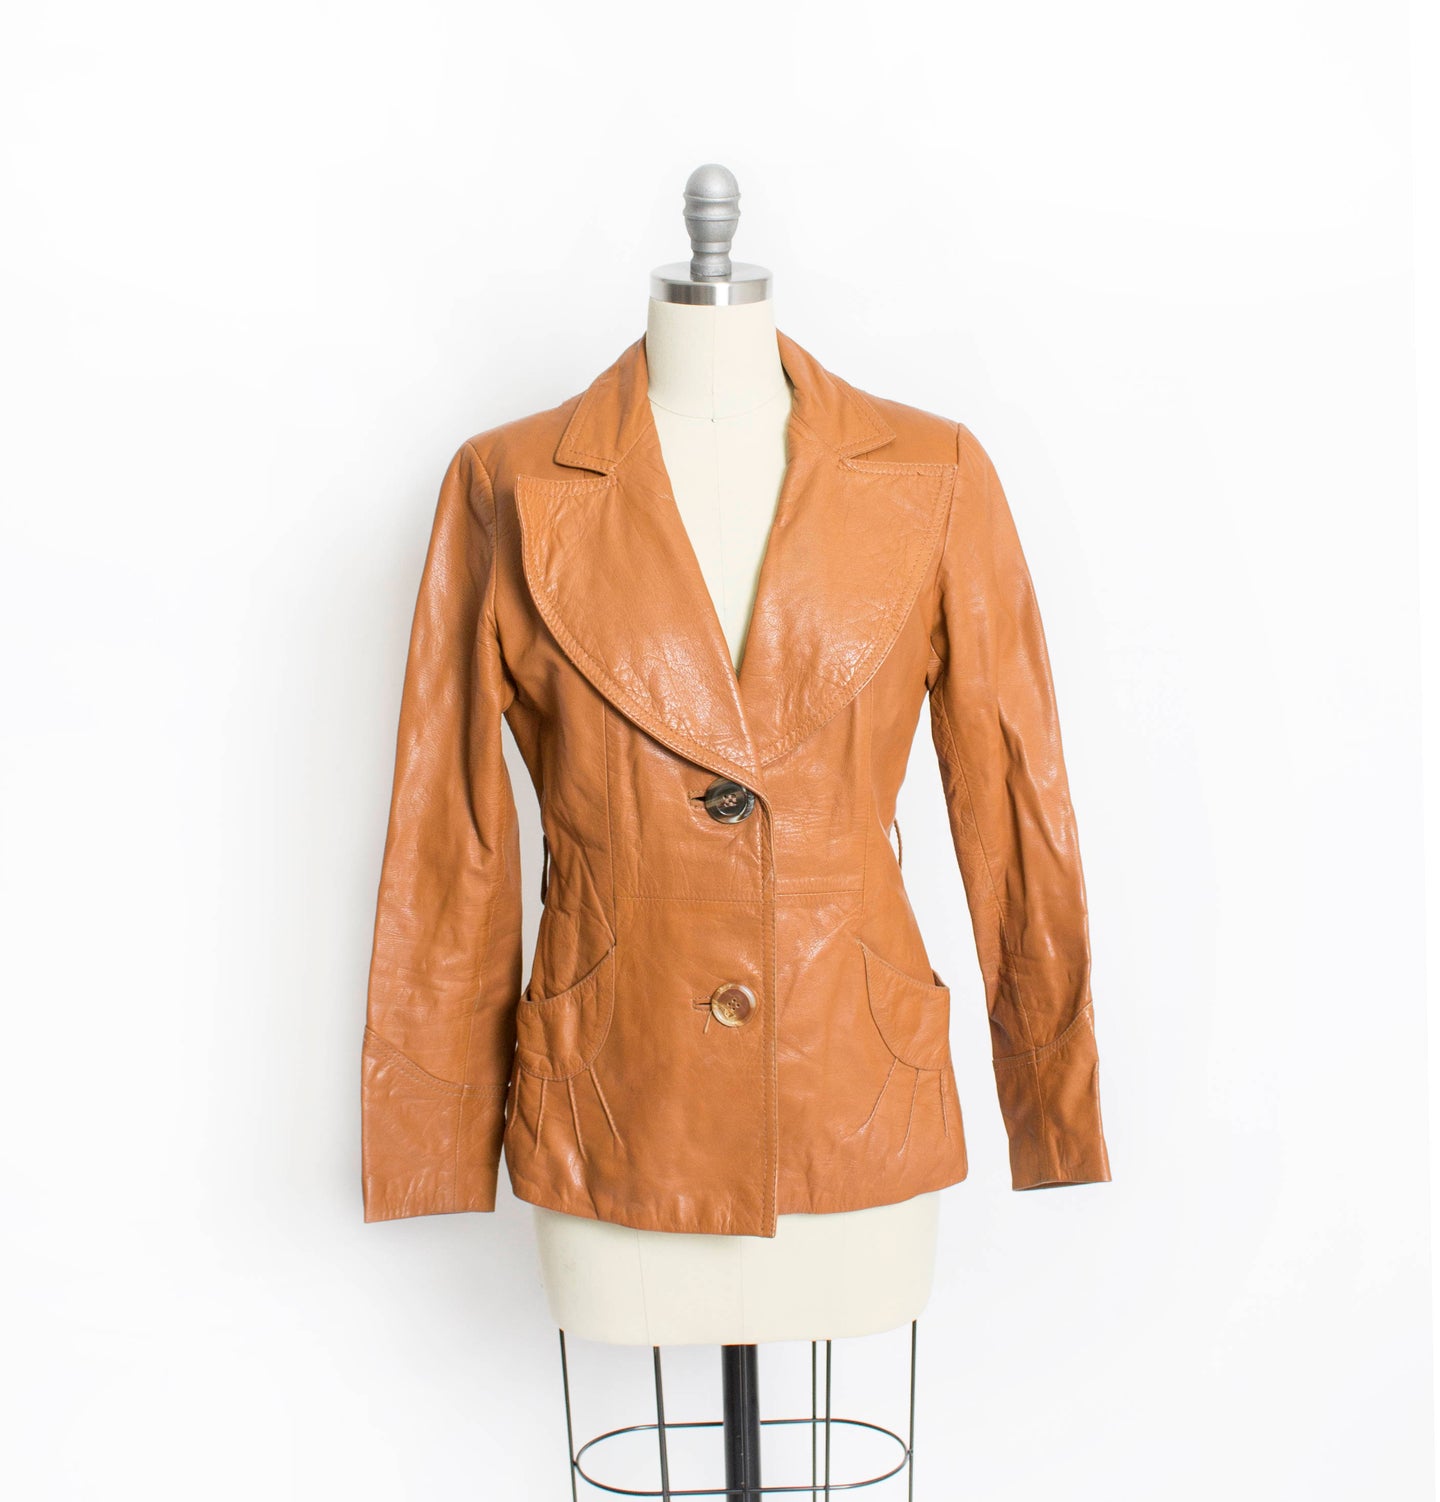 1970s Leather Jacket Sunburst Brown Cropped Small